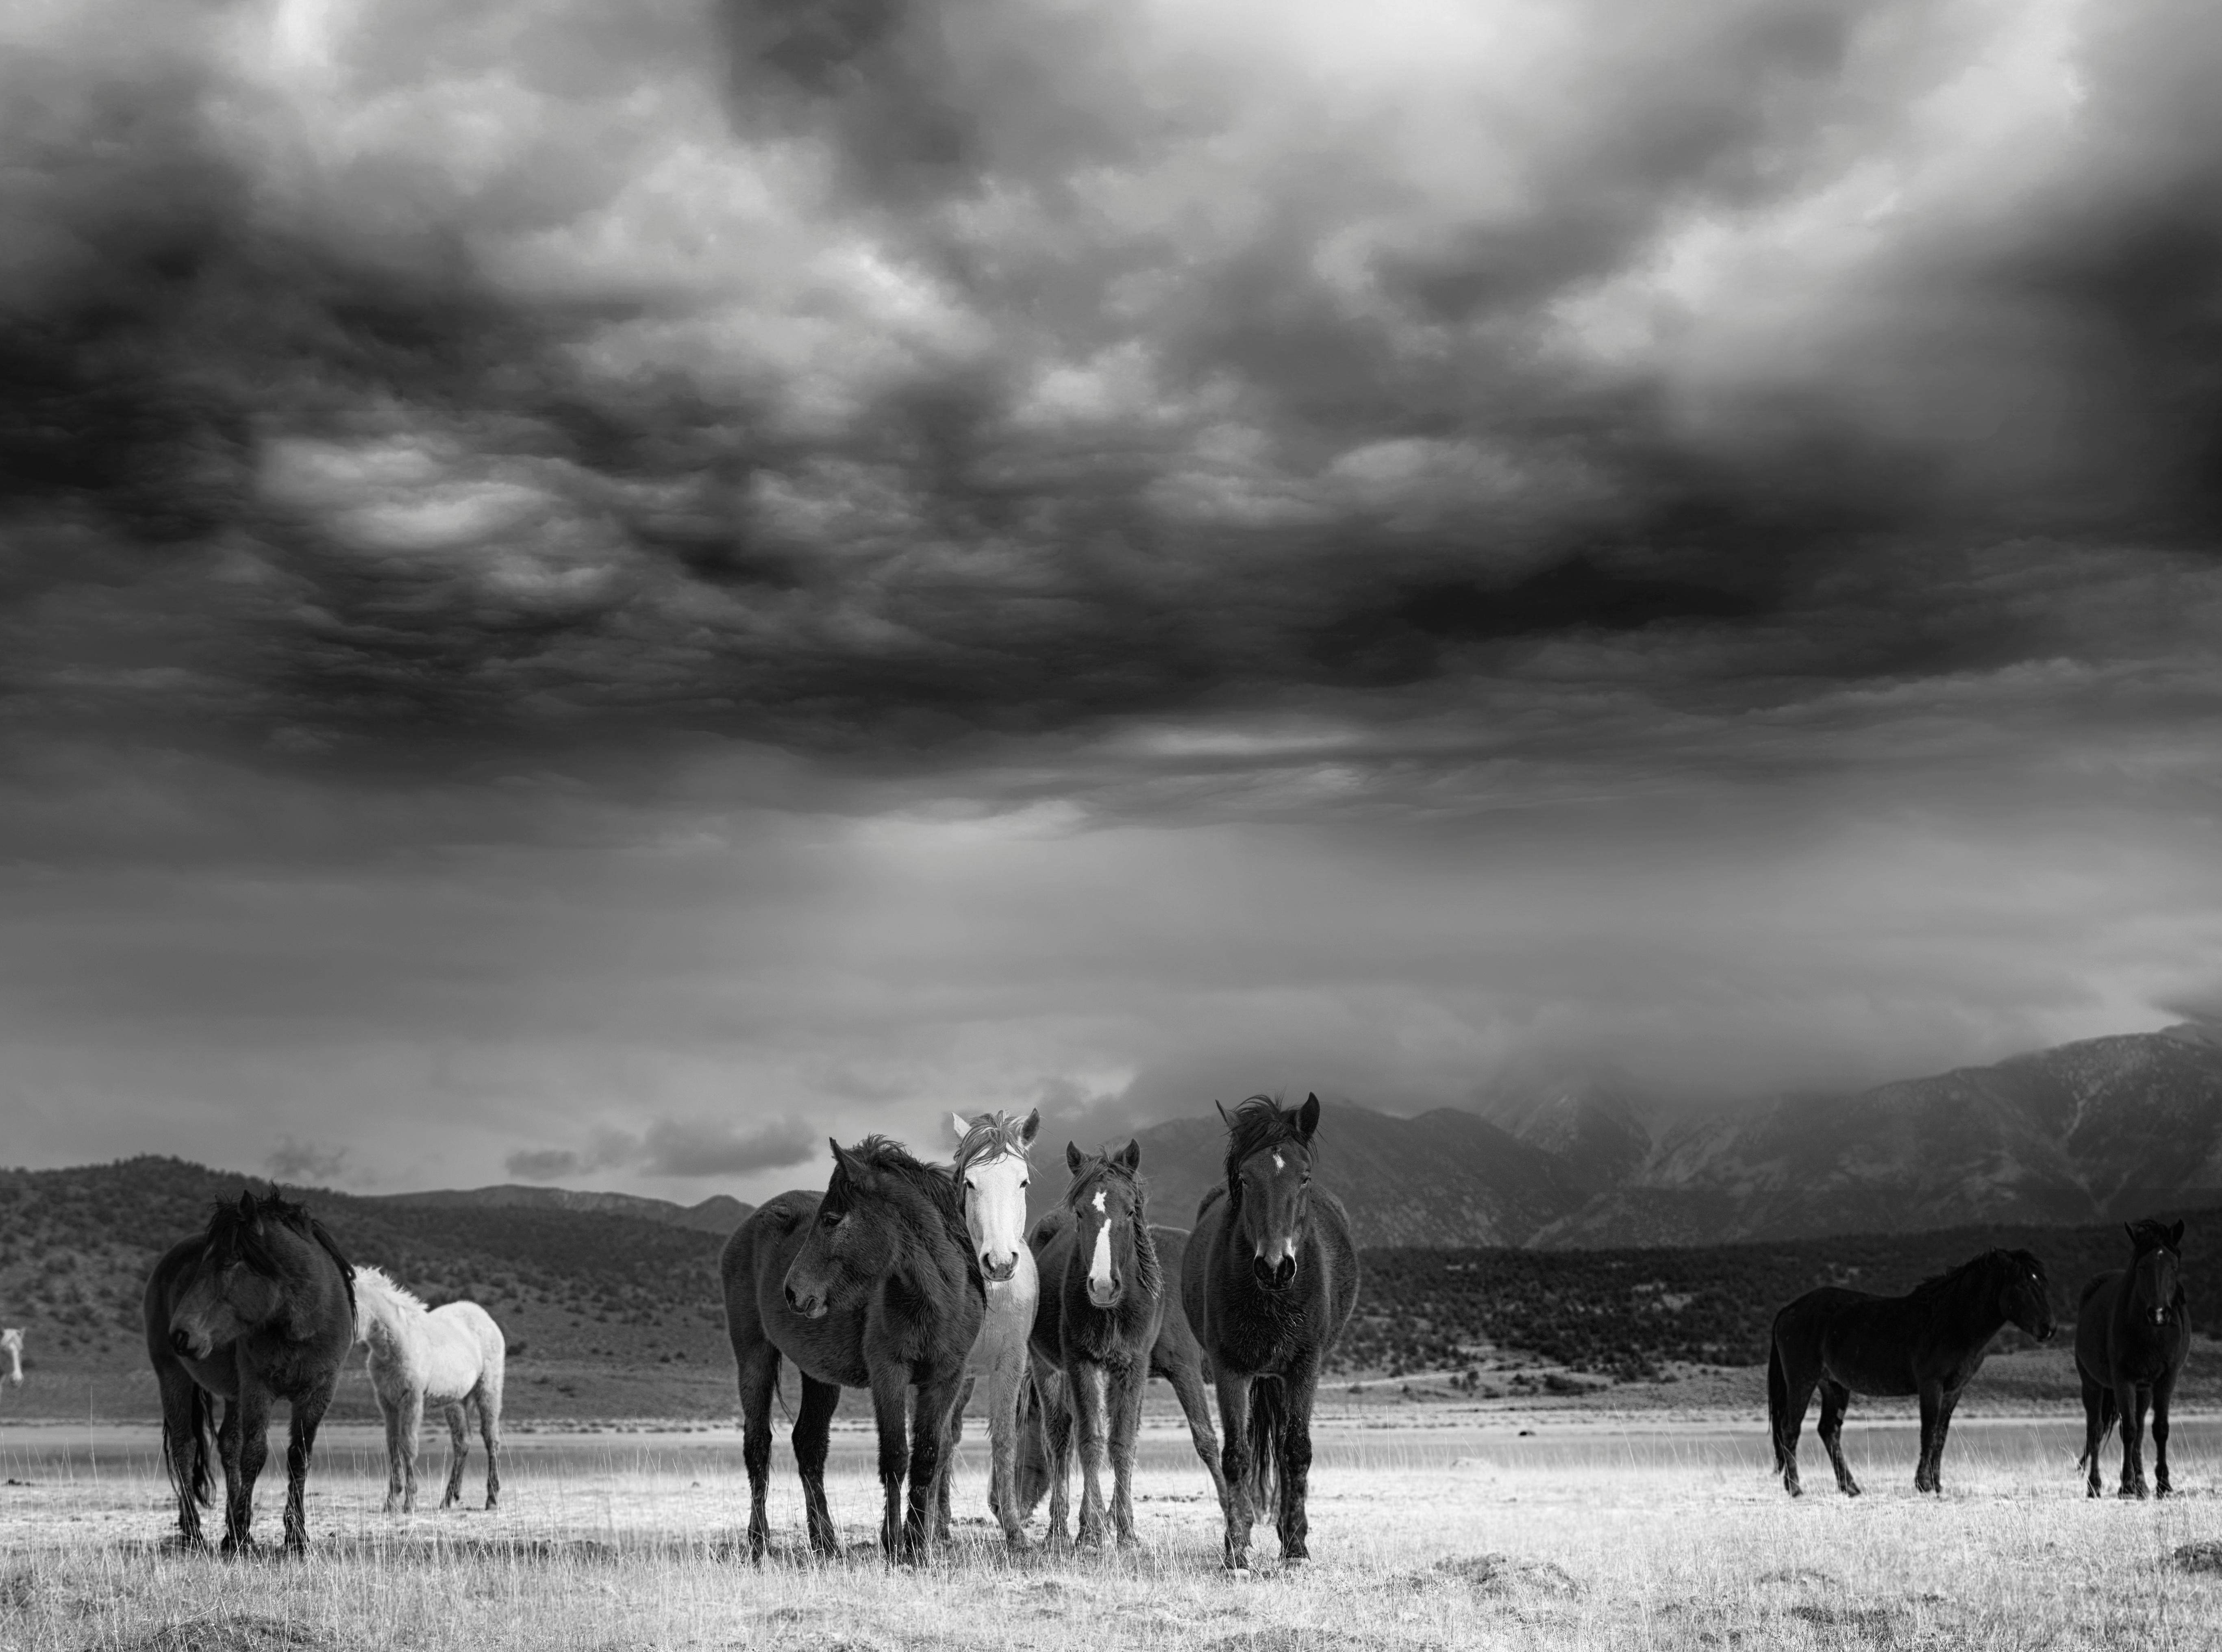 Shane Russeck Black and White Photograph - Fine Art Photography of Wild Horses "The Calm" 40x60 Mustangs Photograph Art